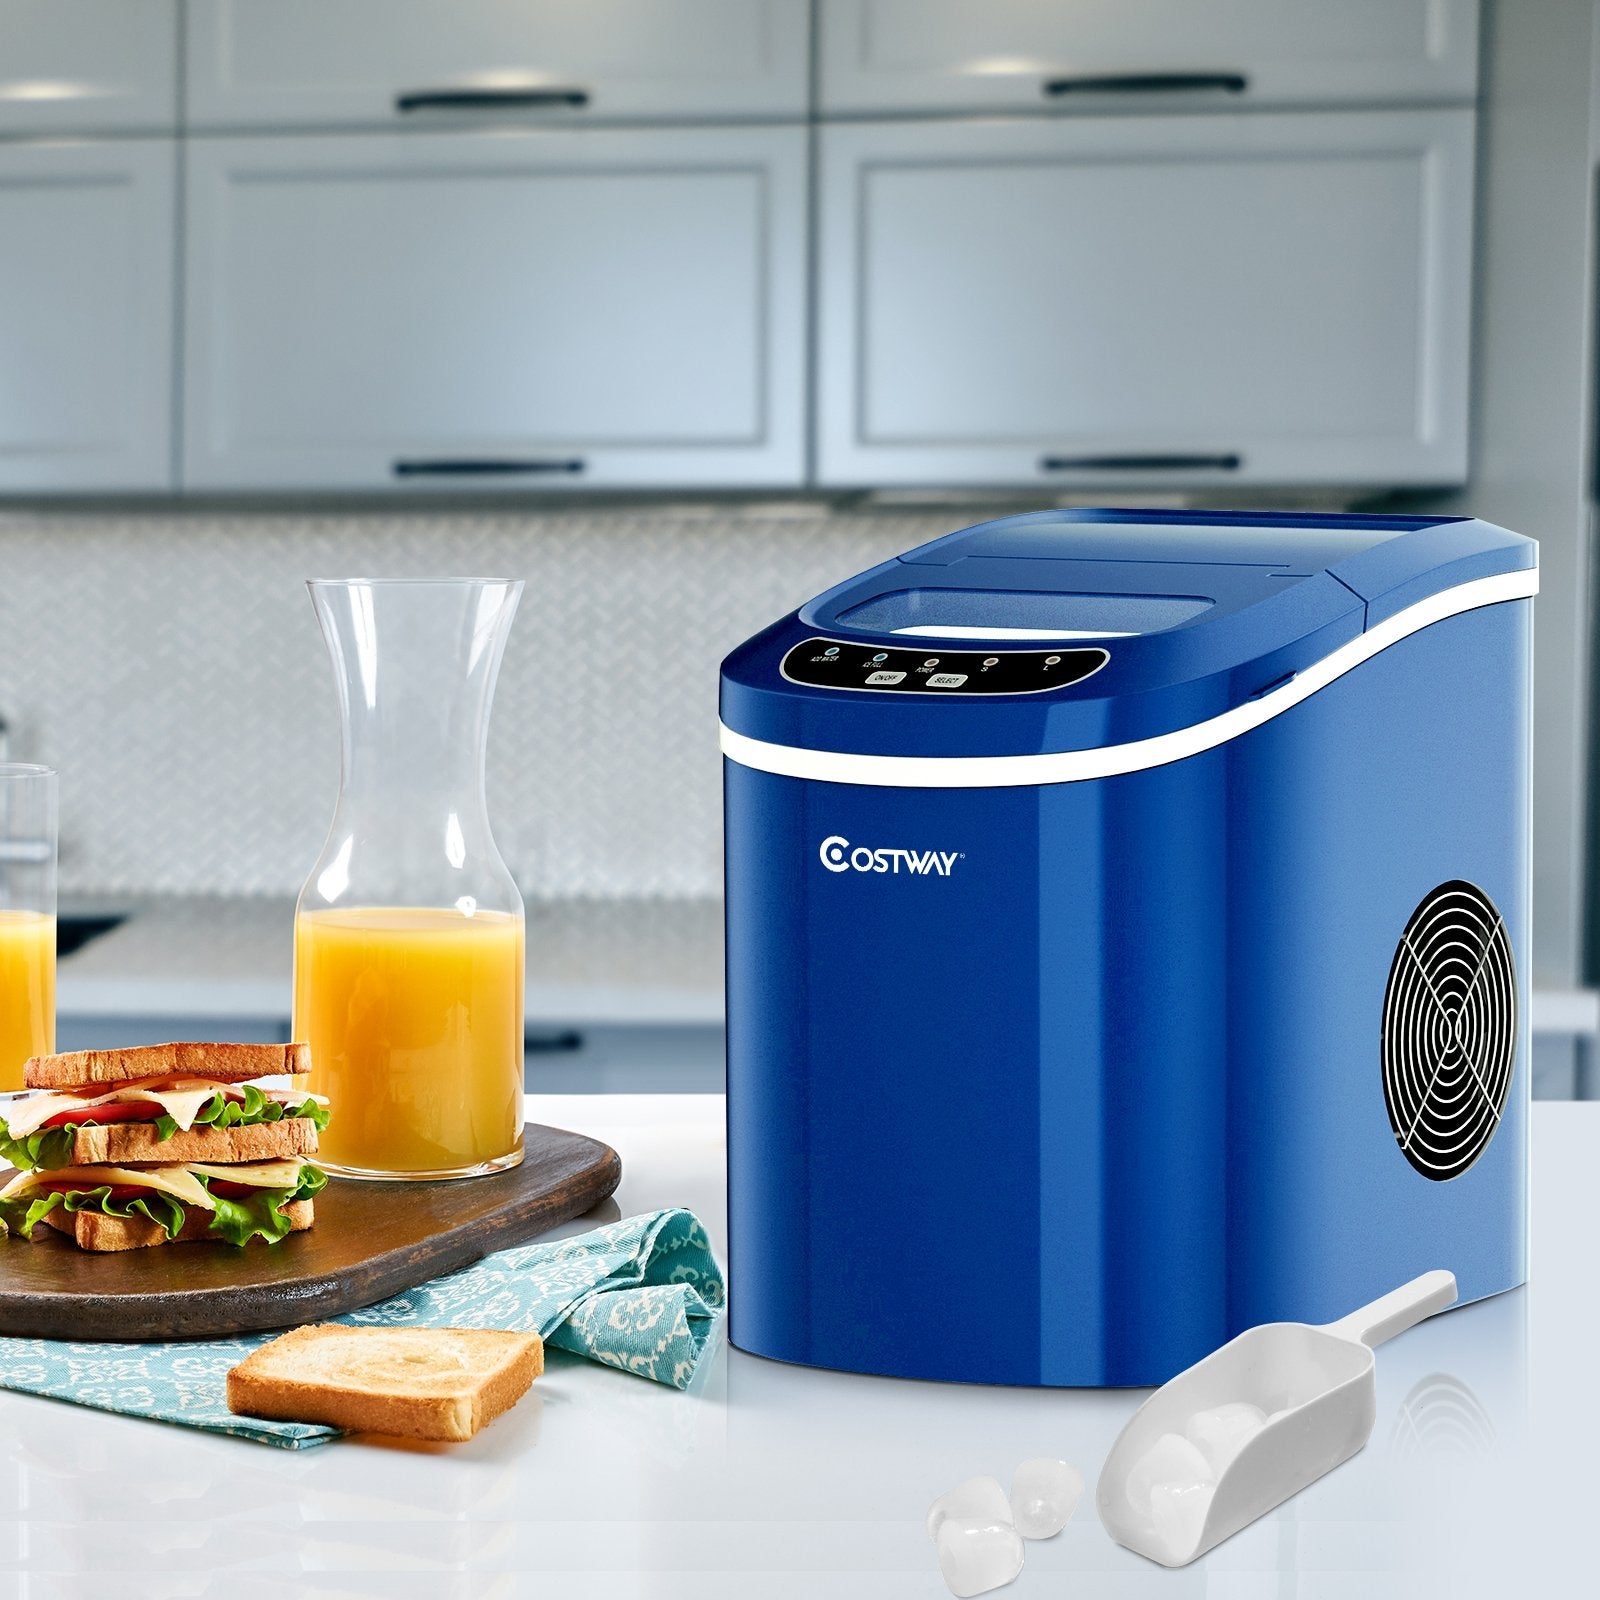 Mini Portable Compact Electric Ice Maker Machine, Navy Ice Makers   at Gallery Canada